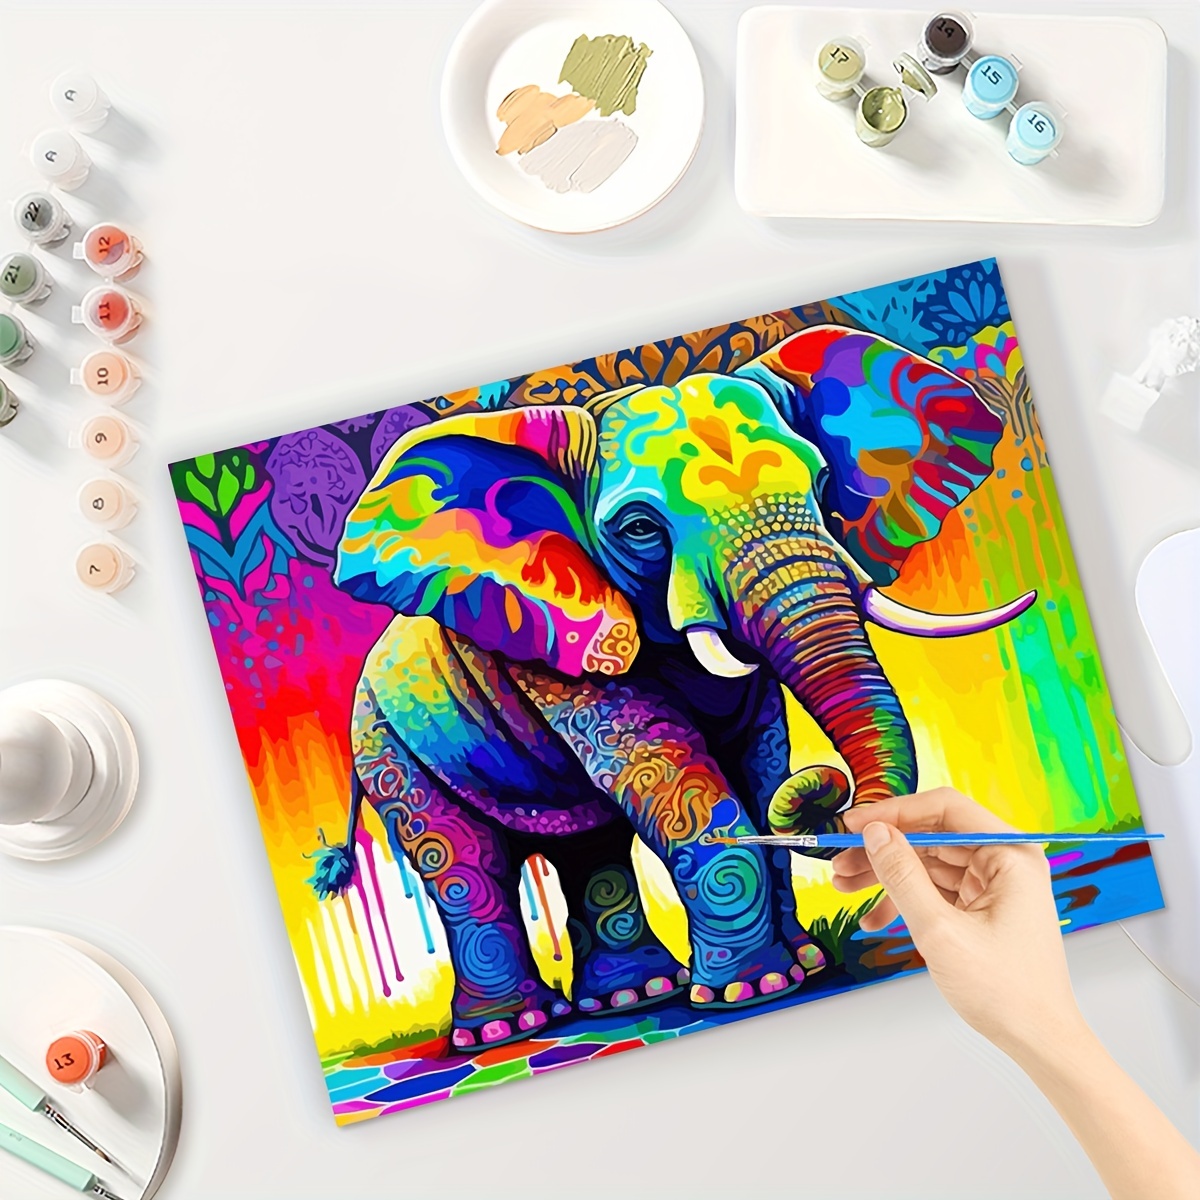 Diy Paint By Numbers Kit For Adults Beginner, Forest Elephant